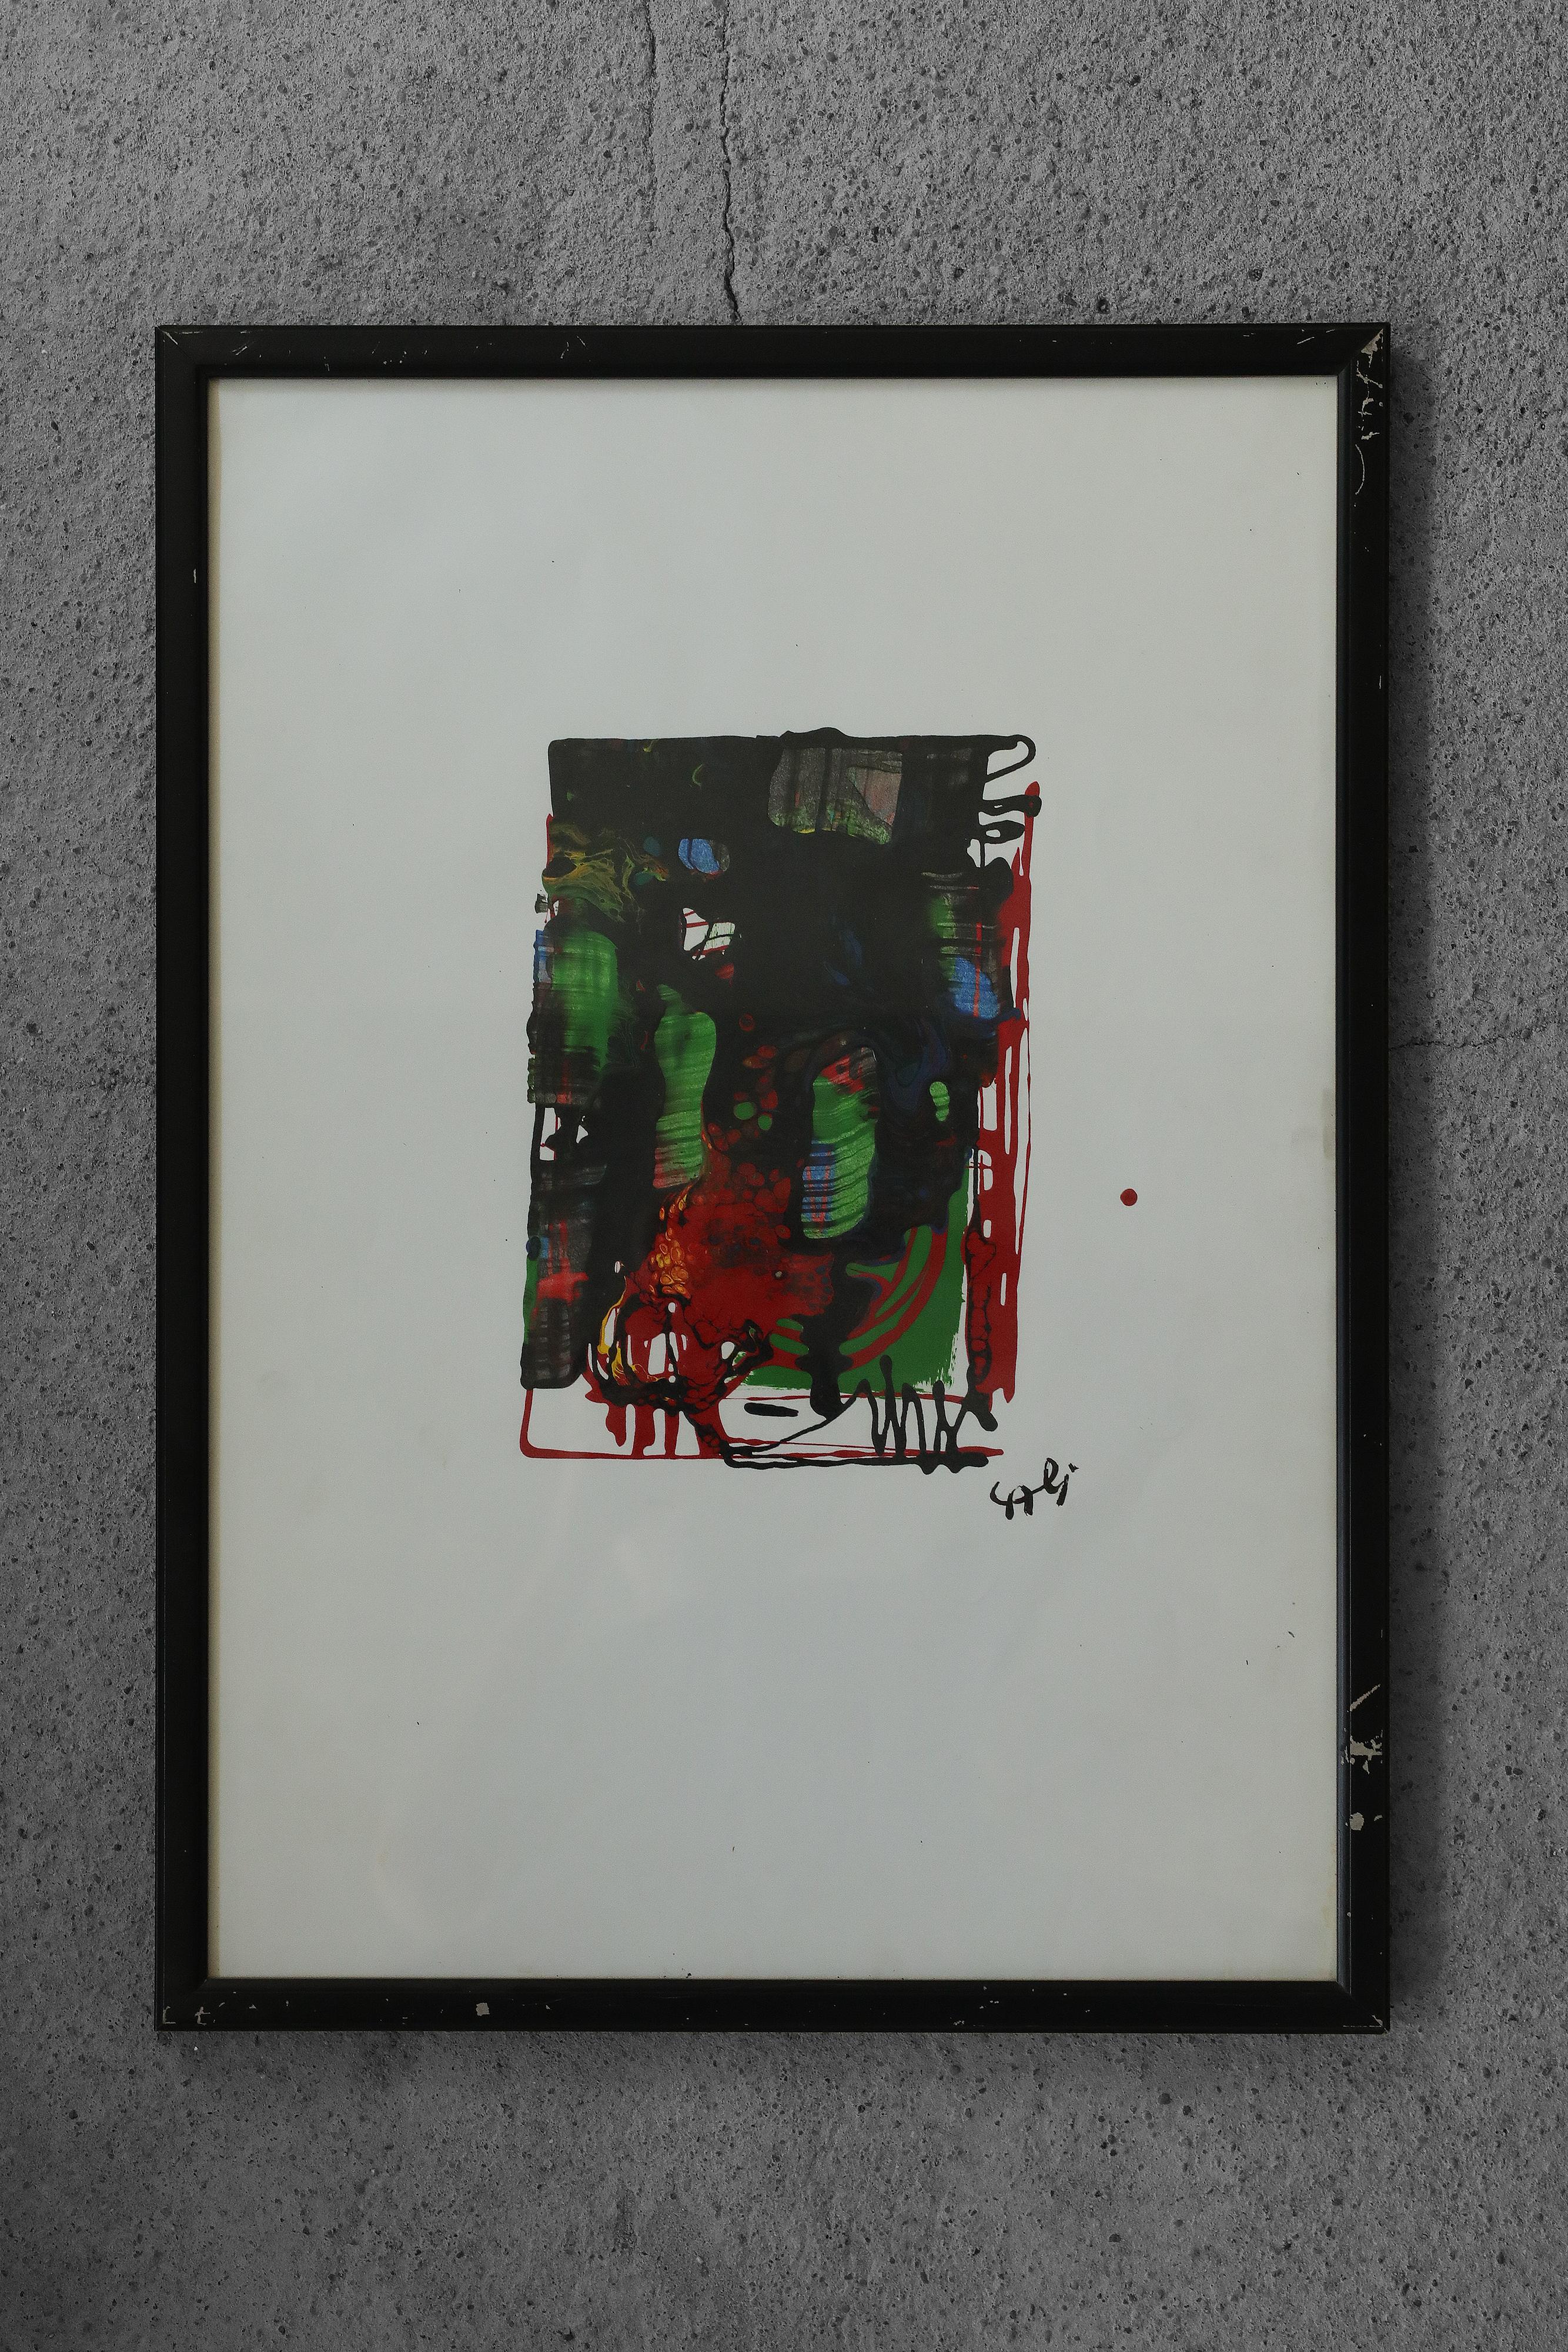 Mid-Century Modern Rosario Calì, Cromatismo Ermetico, Mixed Media on Paper, 1960s, Framed For Sale